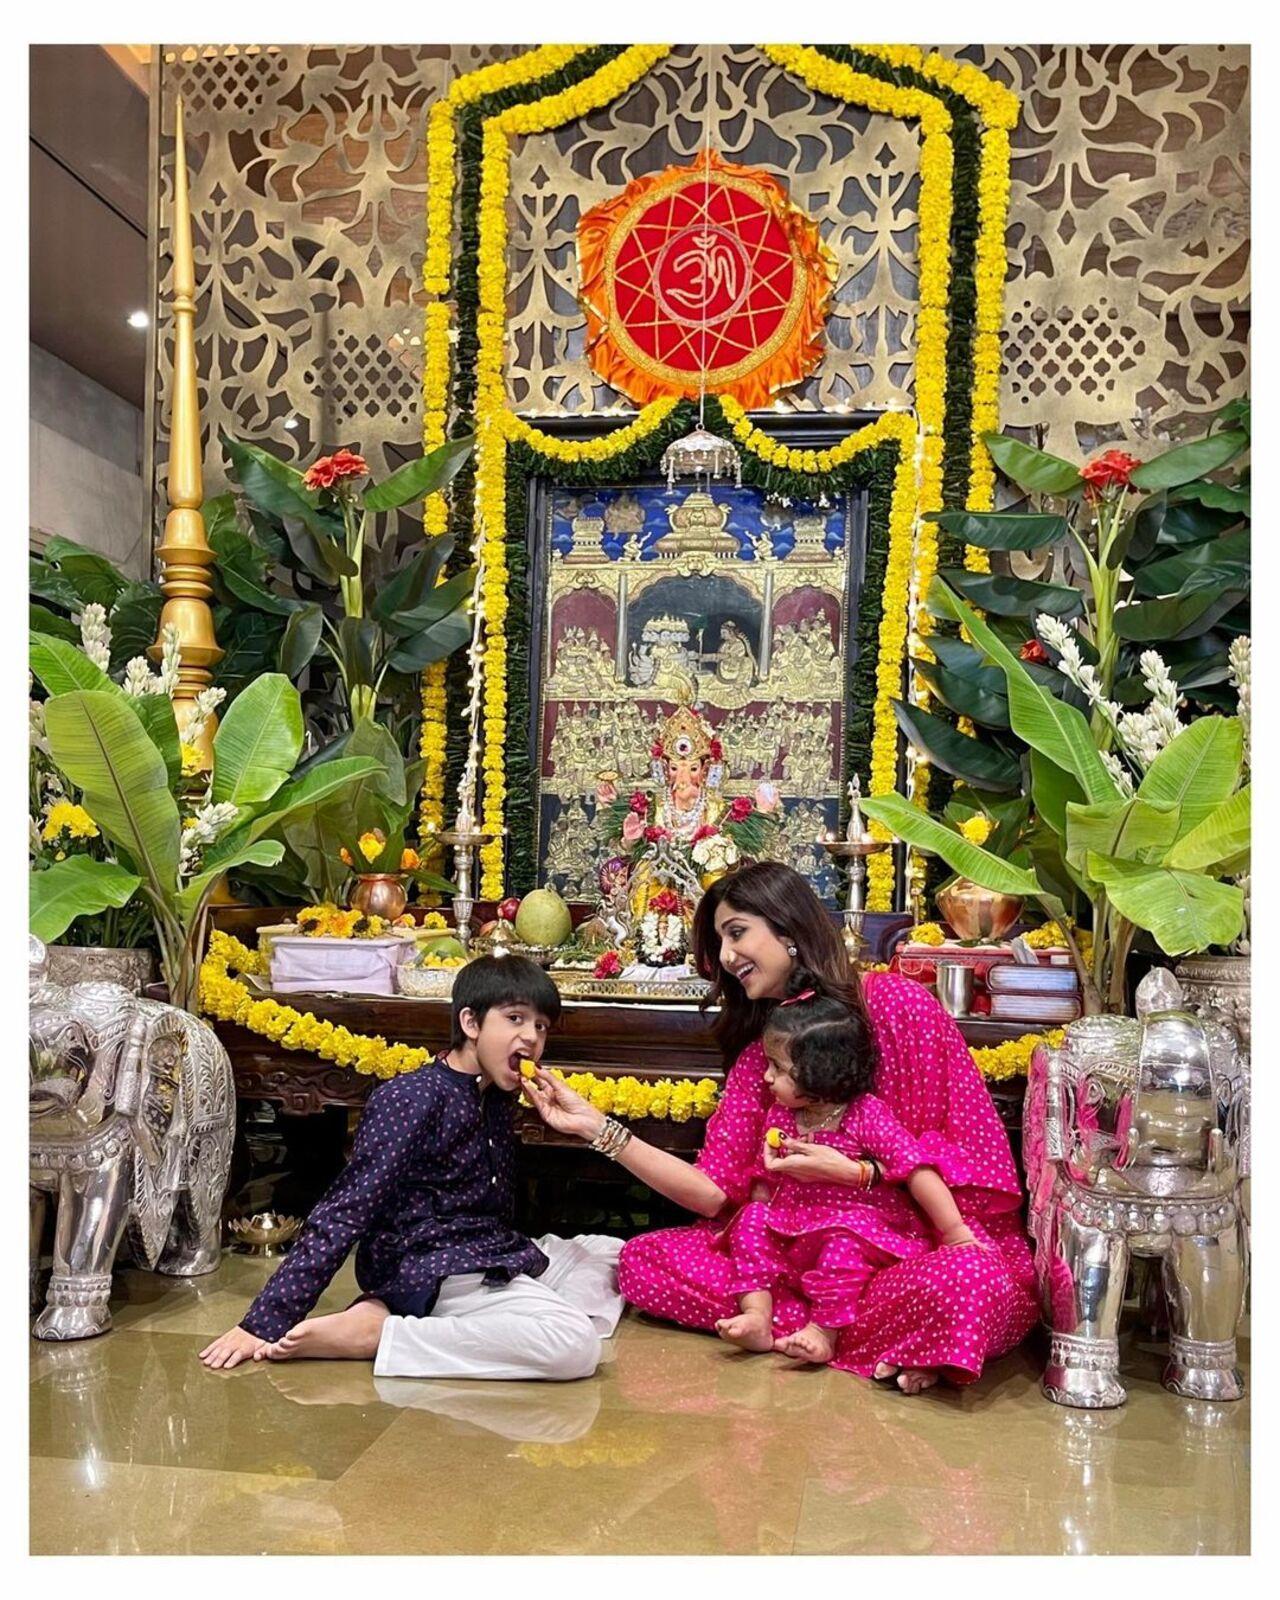 Shilpa Shetty celebrates Ganesh Chaturthi annually with devotion and grandeur. With stunning decoration and music, she welcomes Bappa home